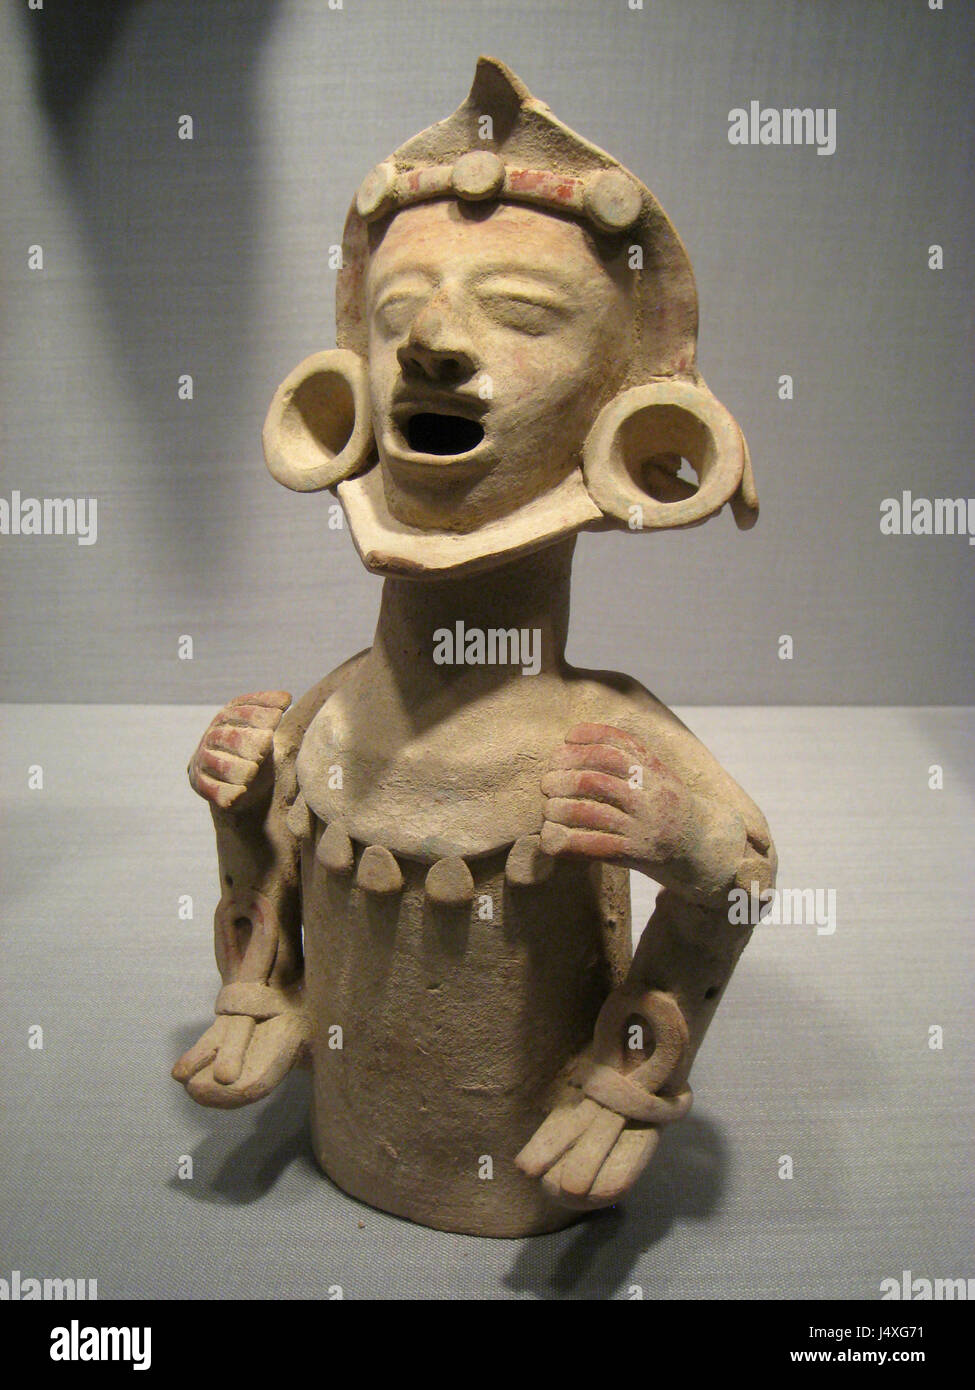 Xipe Figure, Mexico, State of Puebla, Tehuacan Valley, 1150 1521 AD, ceramic, Pre Columbian collection, Worcester Art Museum   IMG 7658 Stock Photo